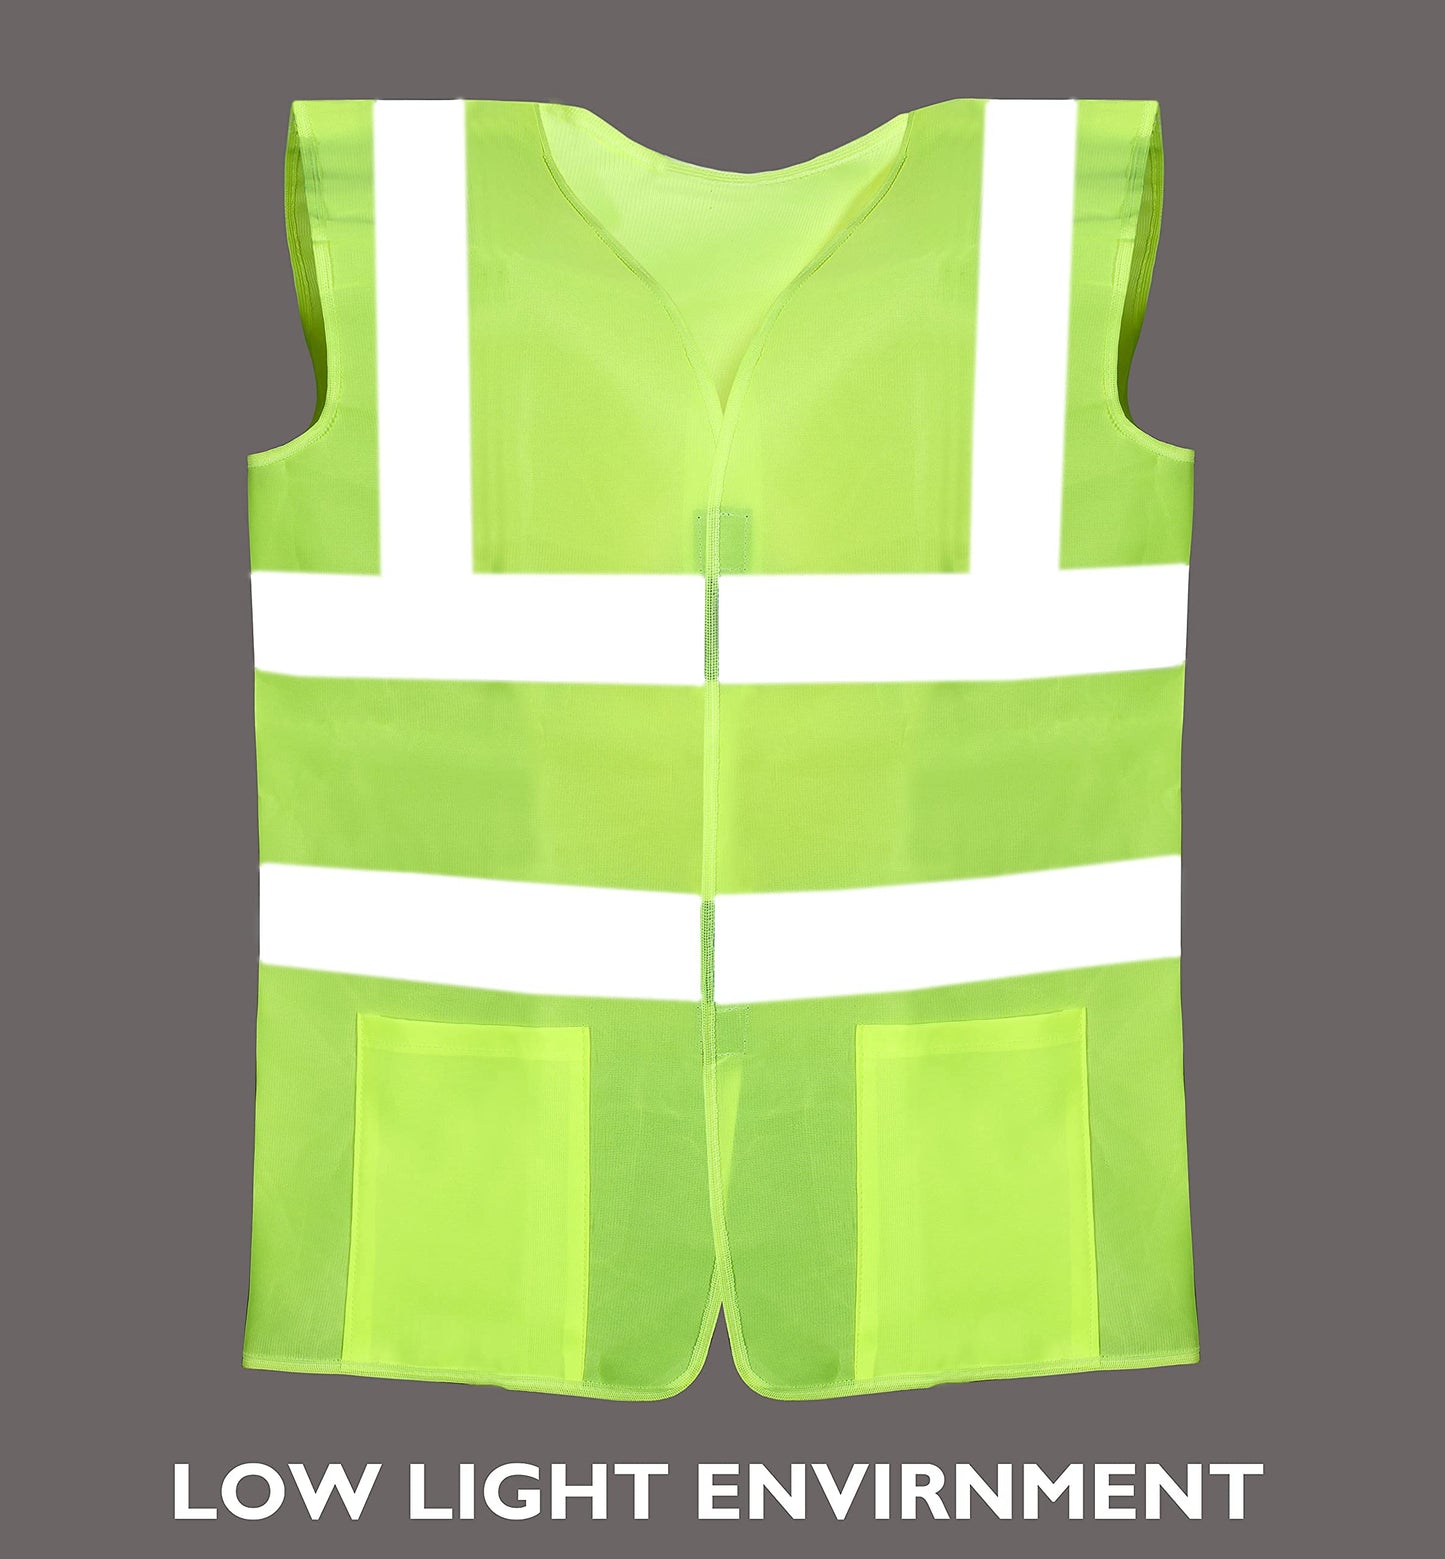 THE CLOWNFISH Pack Of 10 Hi-Vis Reflective Safety Vest Unisex Polyester Workwear Jacket Safety Coat with Reflective Tape for Traffic Sports Construction Site (XL, Green)